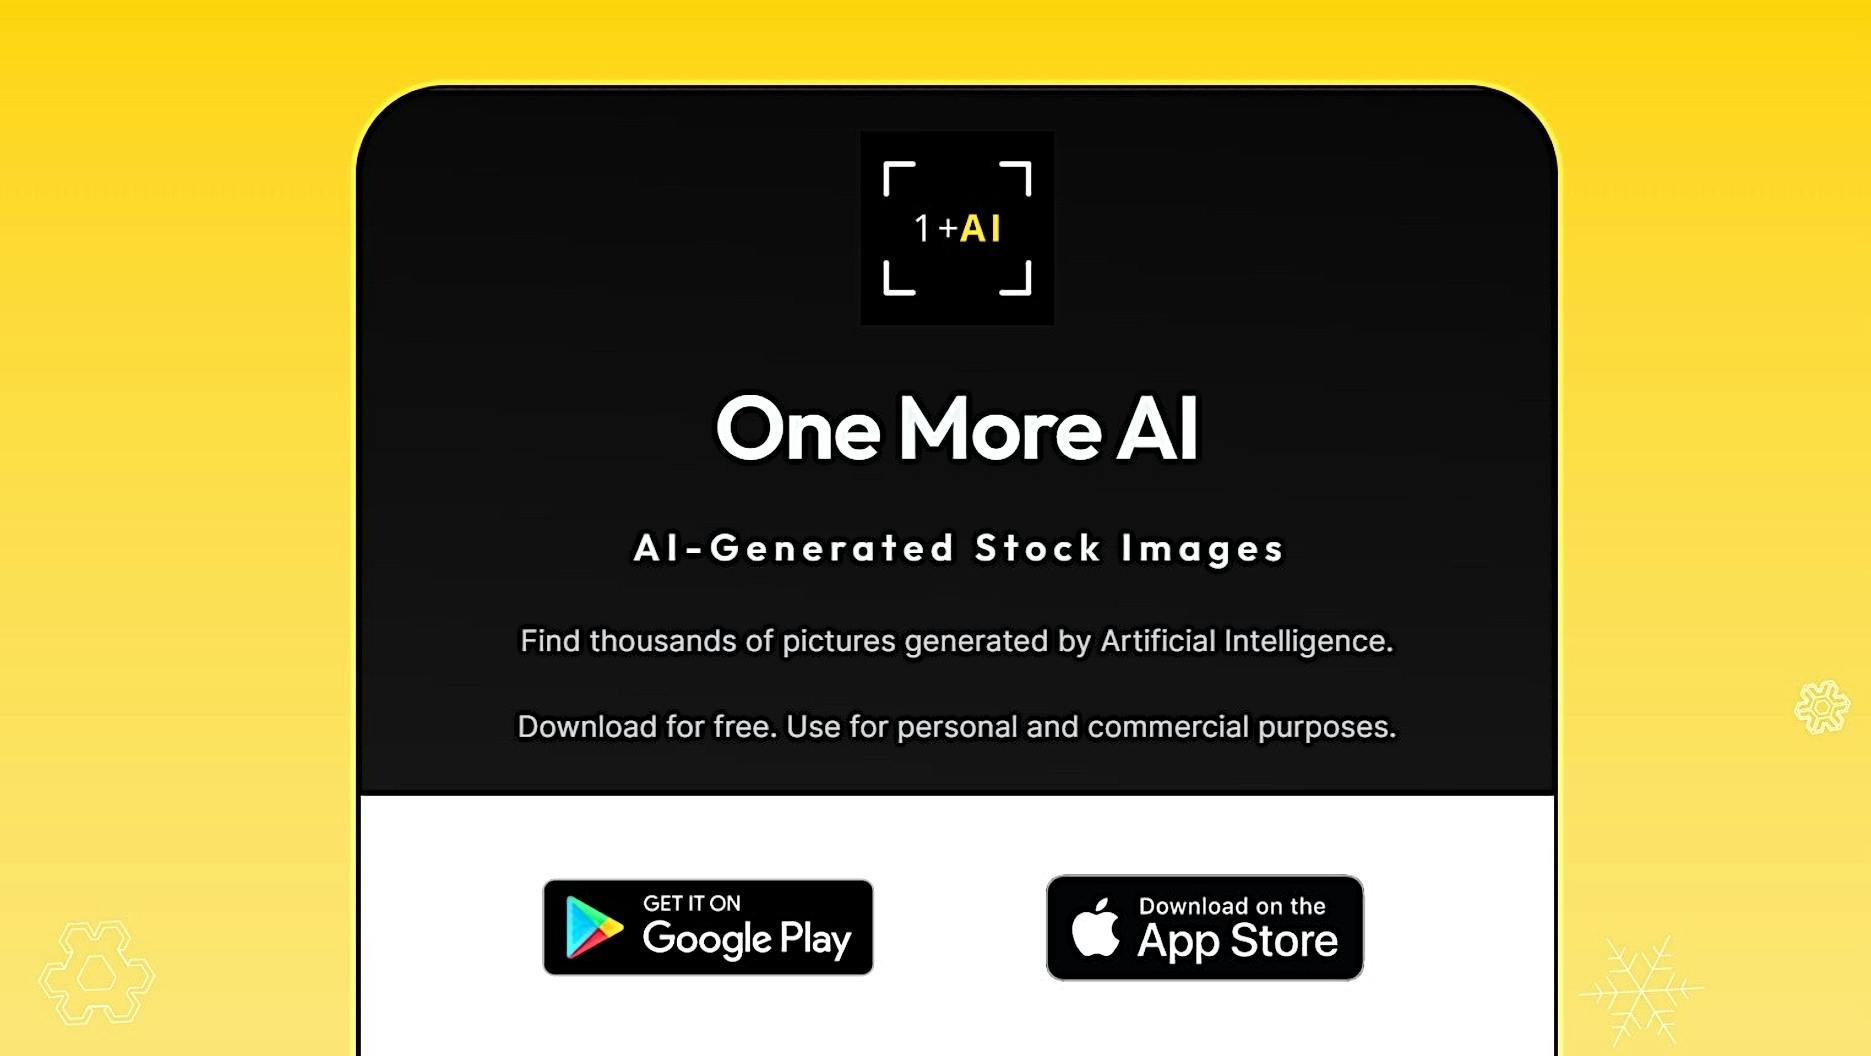 One More AI featured